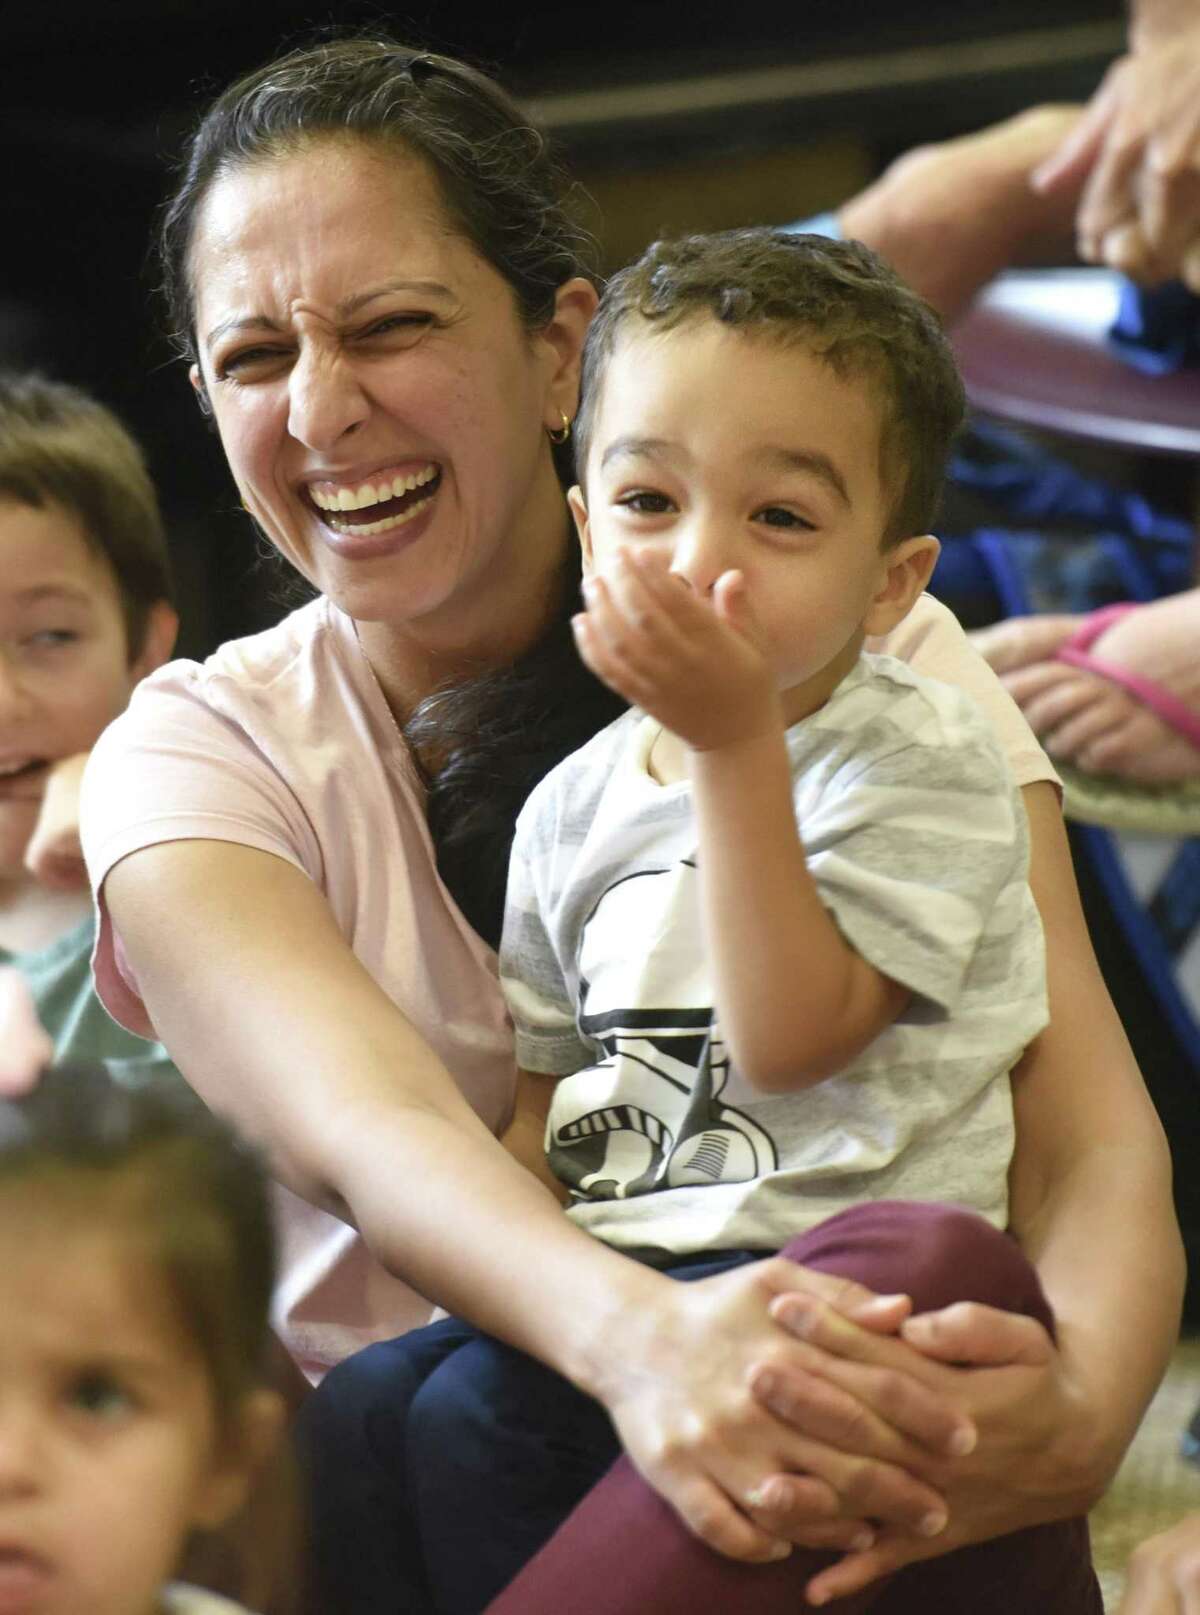 Davina Kahlon and Devin Clermont, 2, of Pemberwick, laugh during magician and juggler Scott Jameson's magic show at the Byram Shubert Library in the Byram section of Greenwich, Conn. Monday, Sept. 18, 2018. Dozens of children and parents marveled in amazement at Jameson's magical and juggling feats. Volunteers joined Jameson in the spotlight to assist with certain tricks in the fun and interactive show.